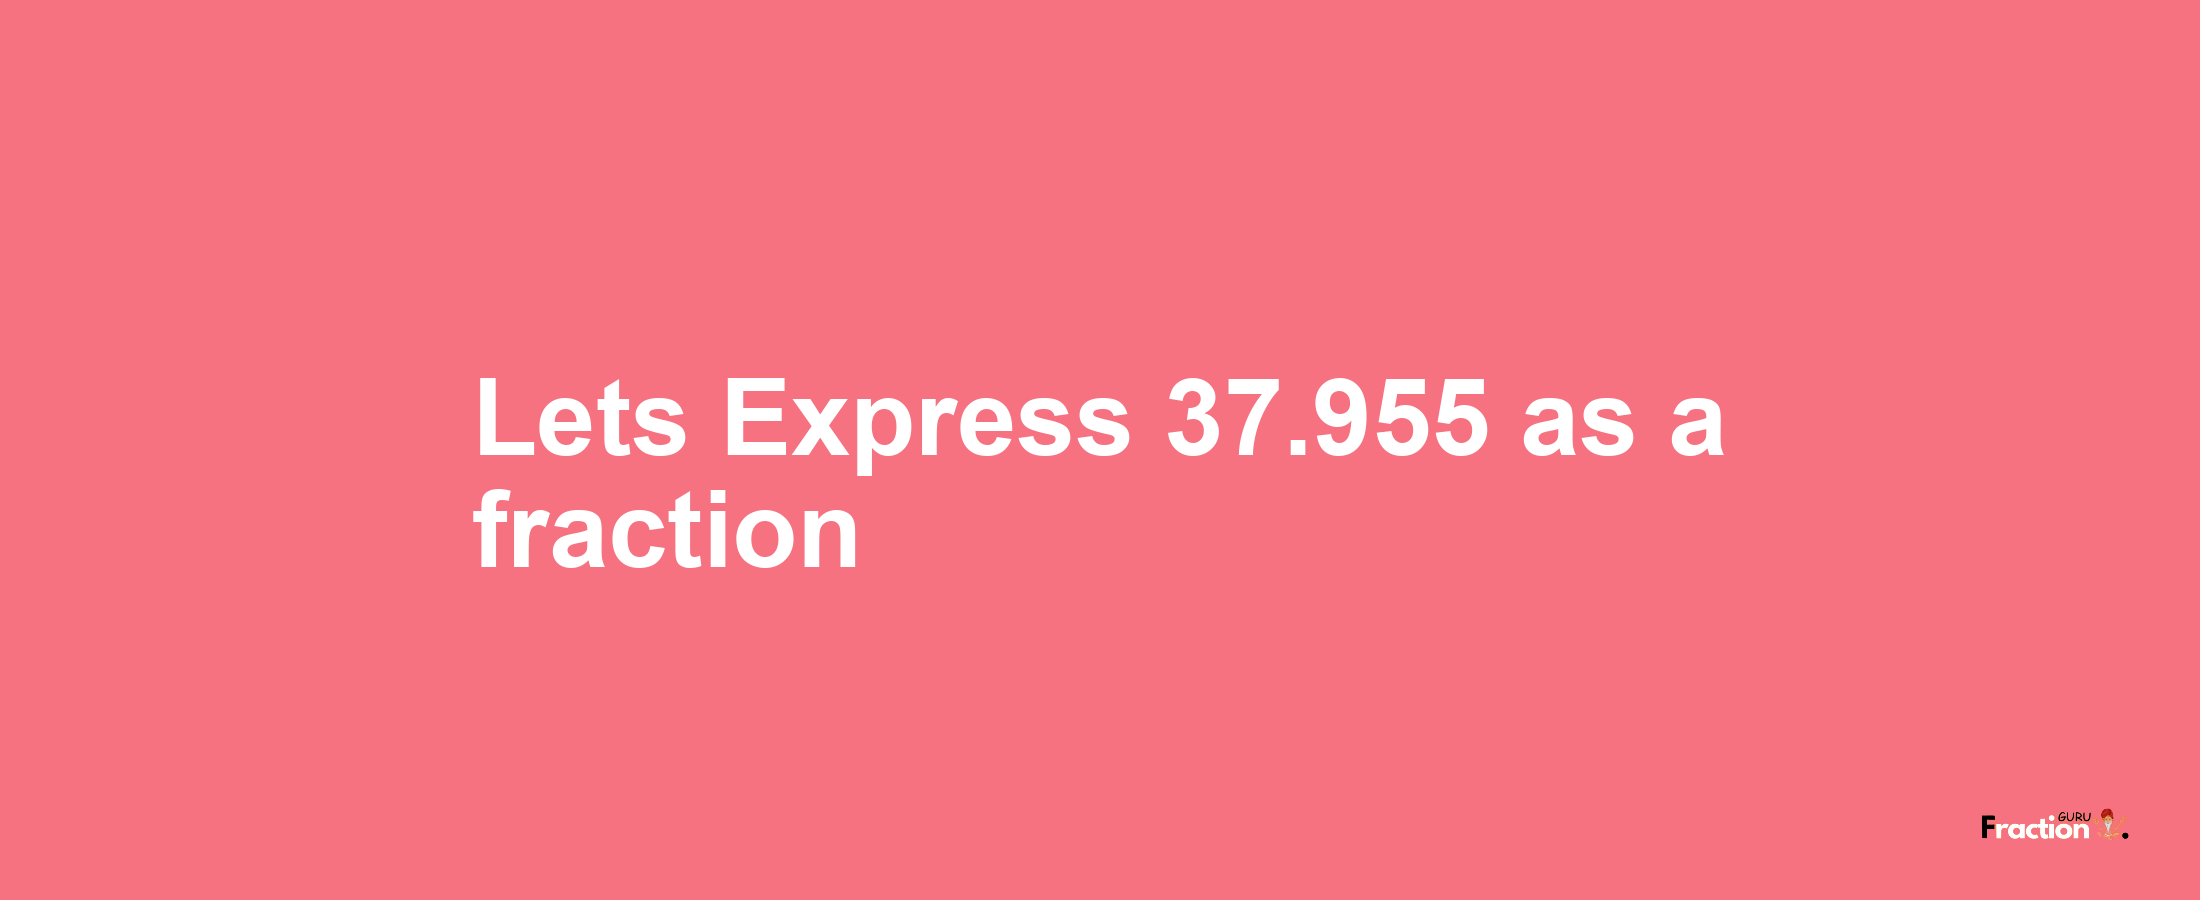 Lets Express 37.955 as afraction